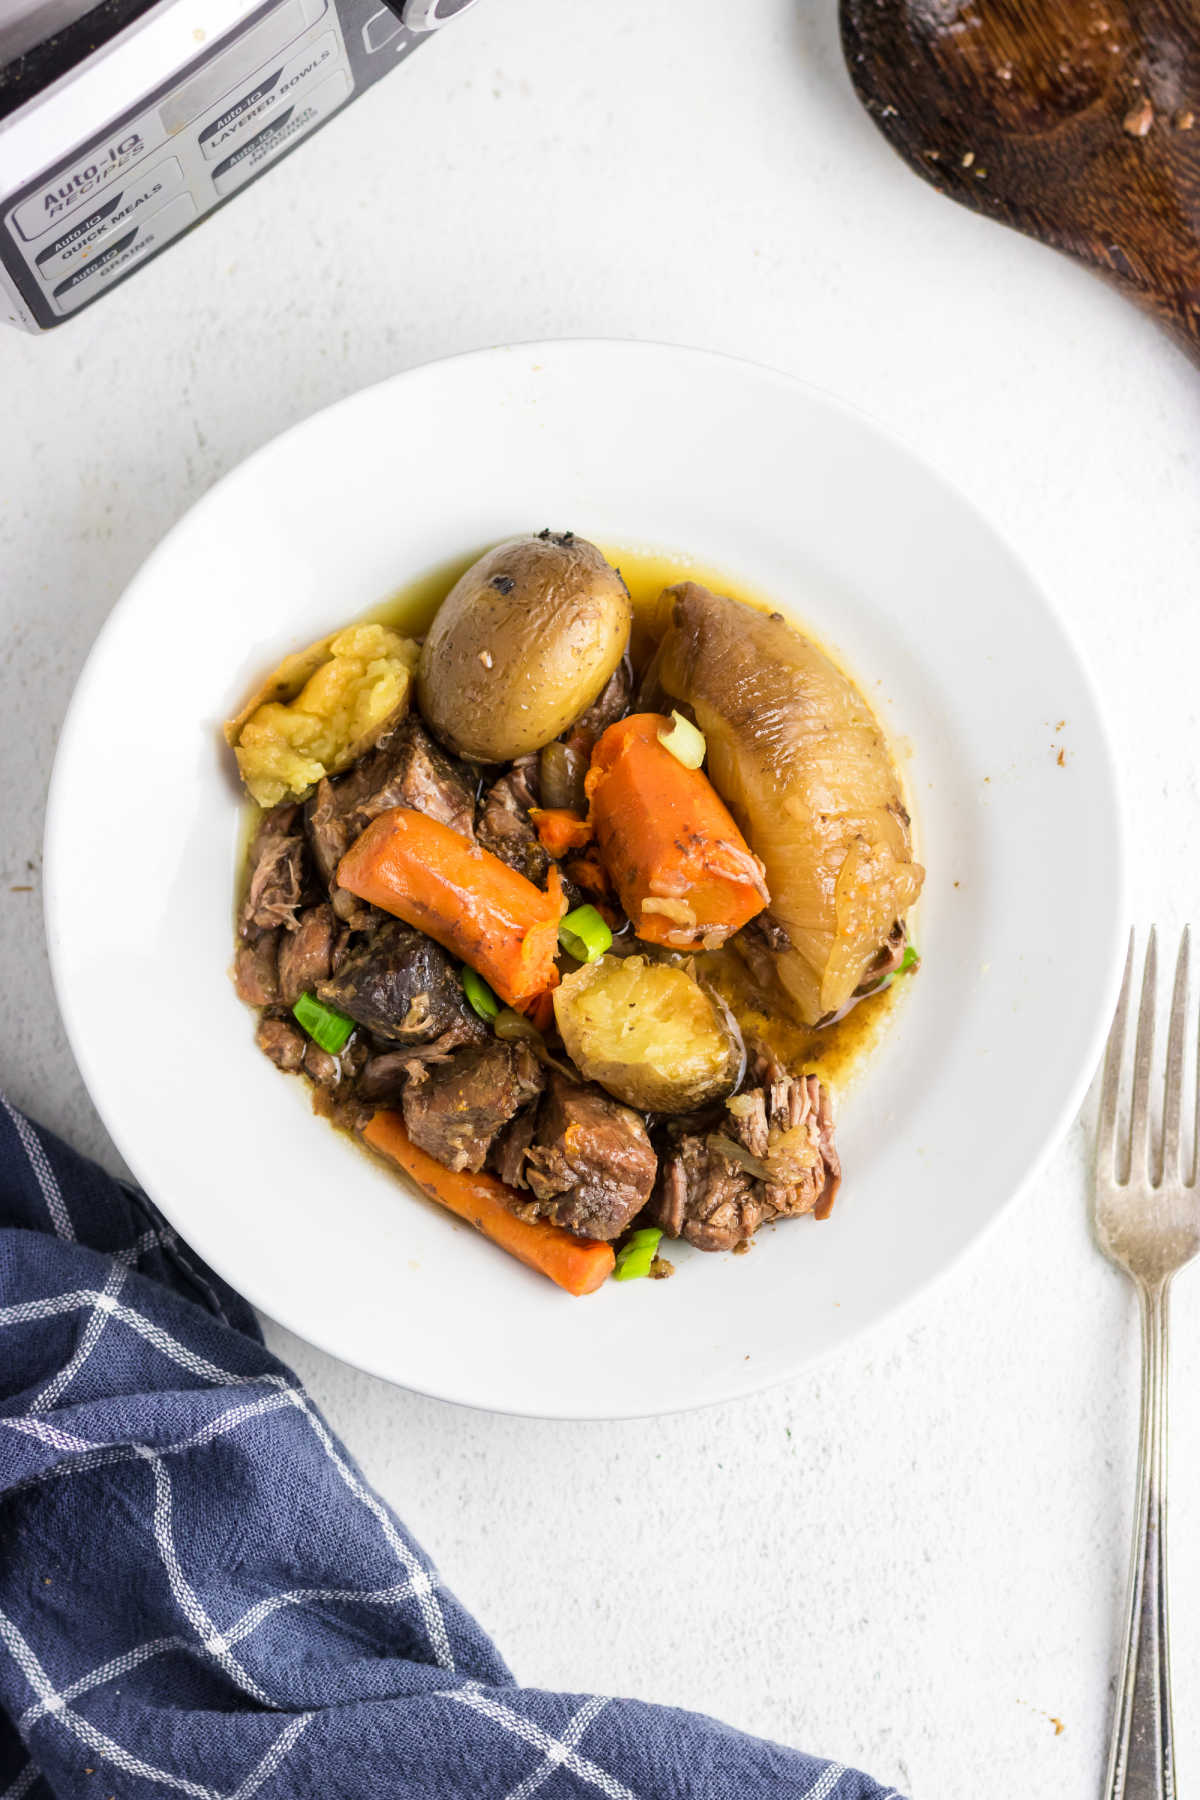 Beef stew on a plate, featuring beef tips, a few cut potatoes, carrots, and some green onions.